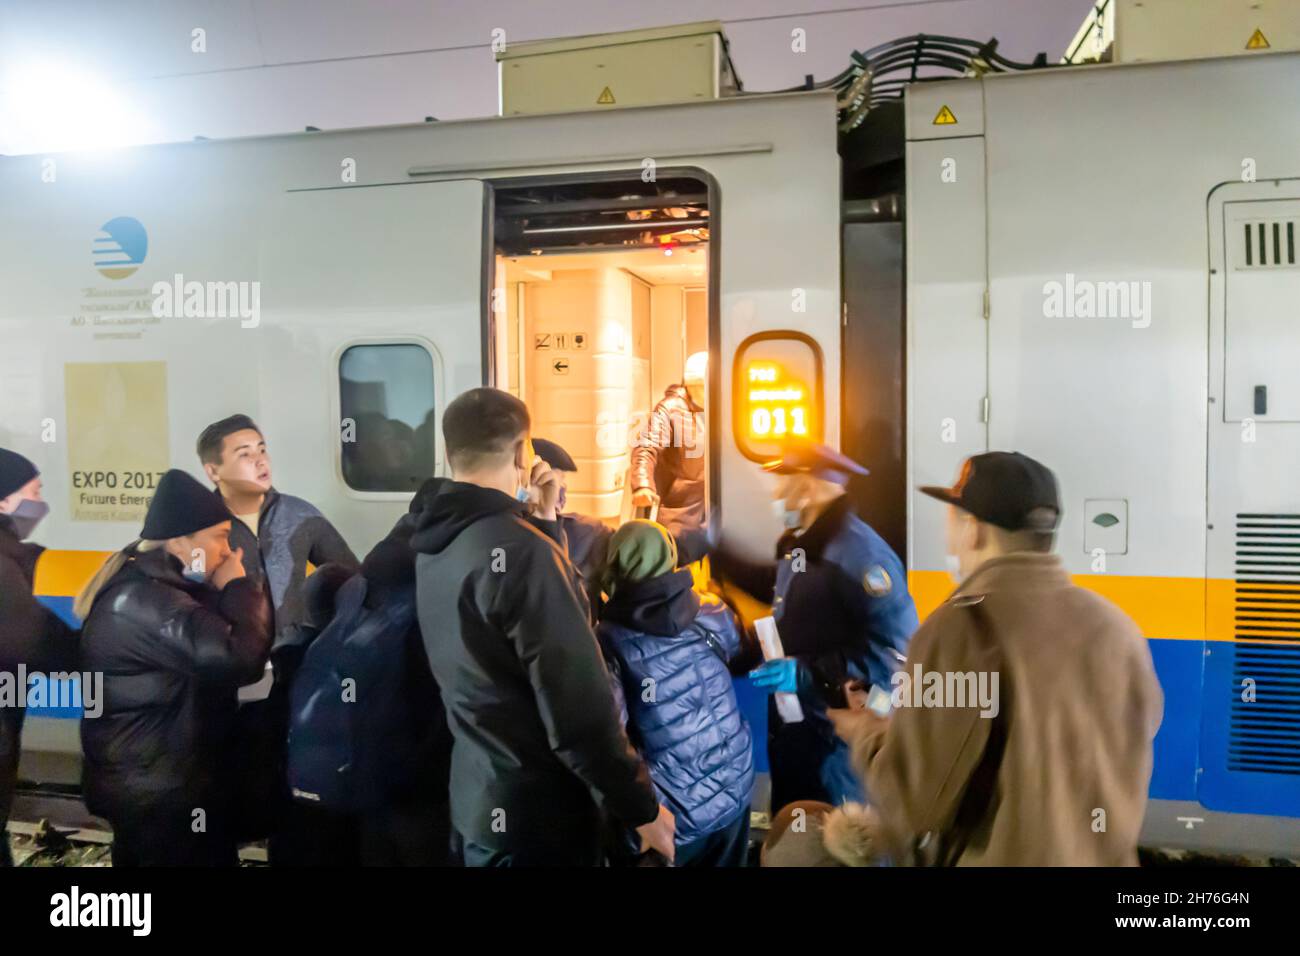 Passengers boarding on the train on the platform of Karagandy Railway stop. Kazakhstan, Central Asia Stock Photo